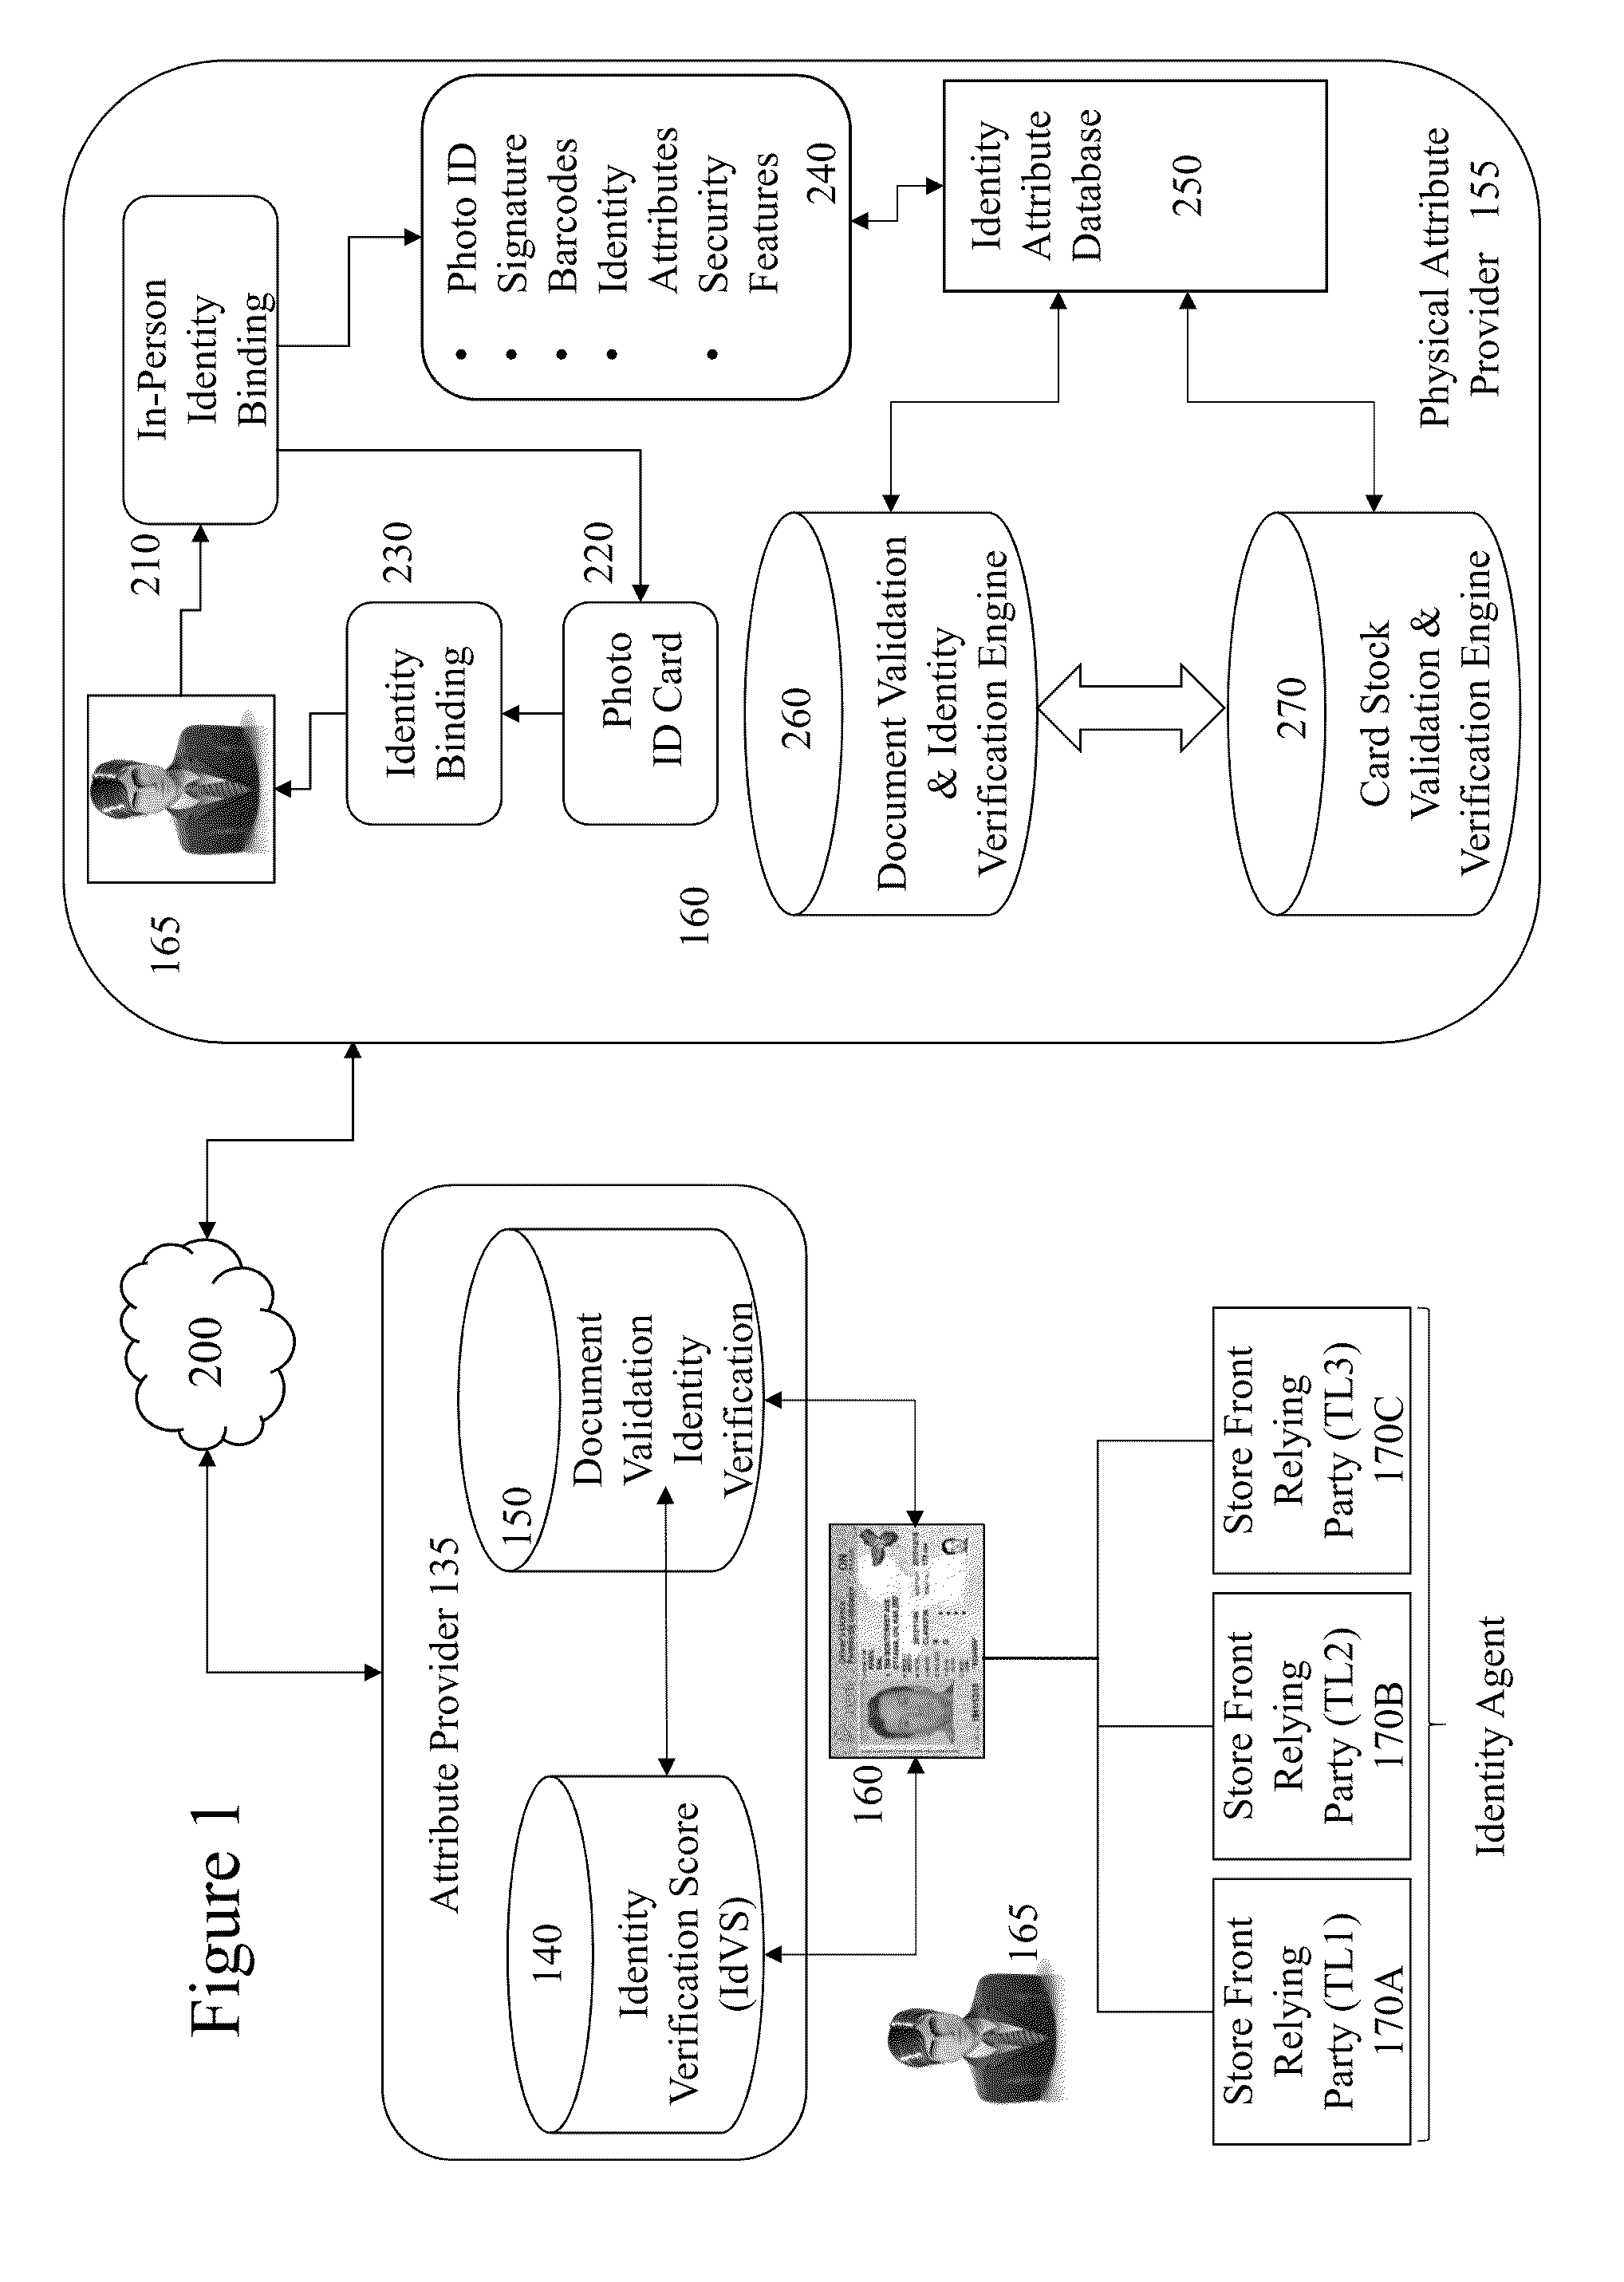 Systems and methods relating to the authenticity and verification of photographic identity documents